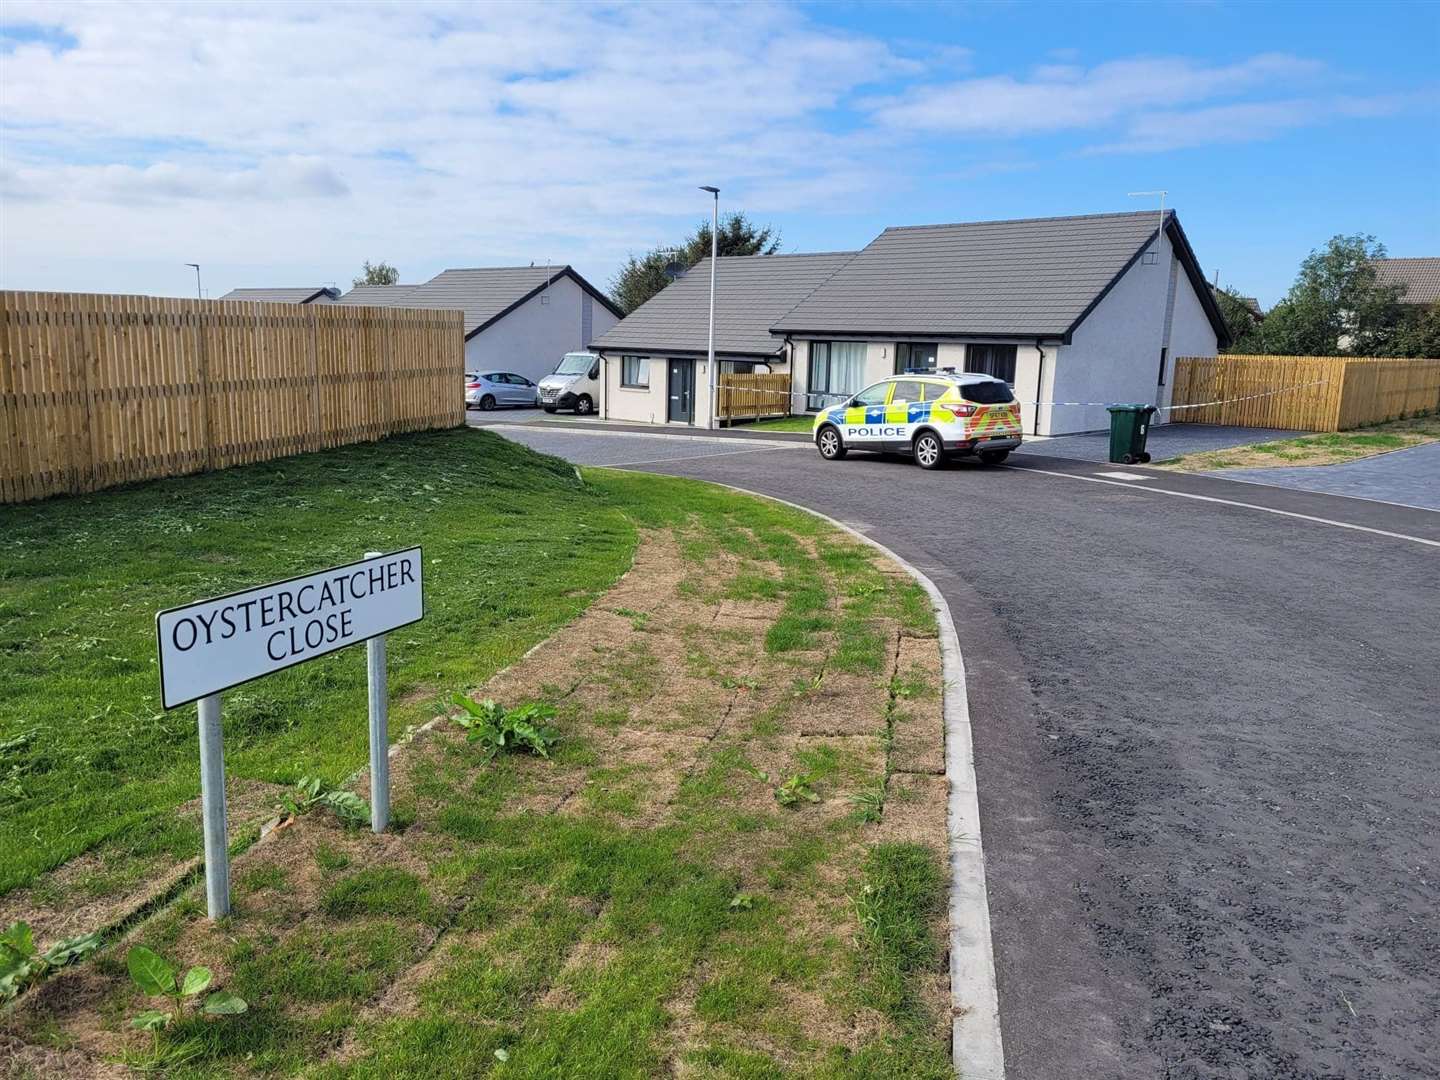 Police guard the scene outside the woman's home in Forres. Picture: Highland News and Media